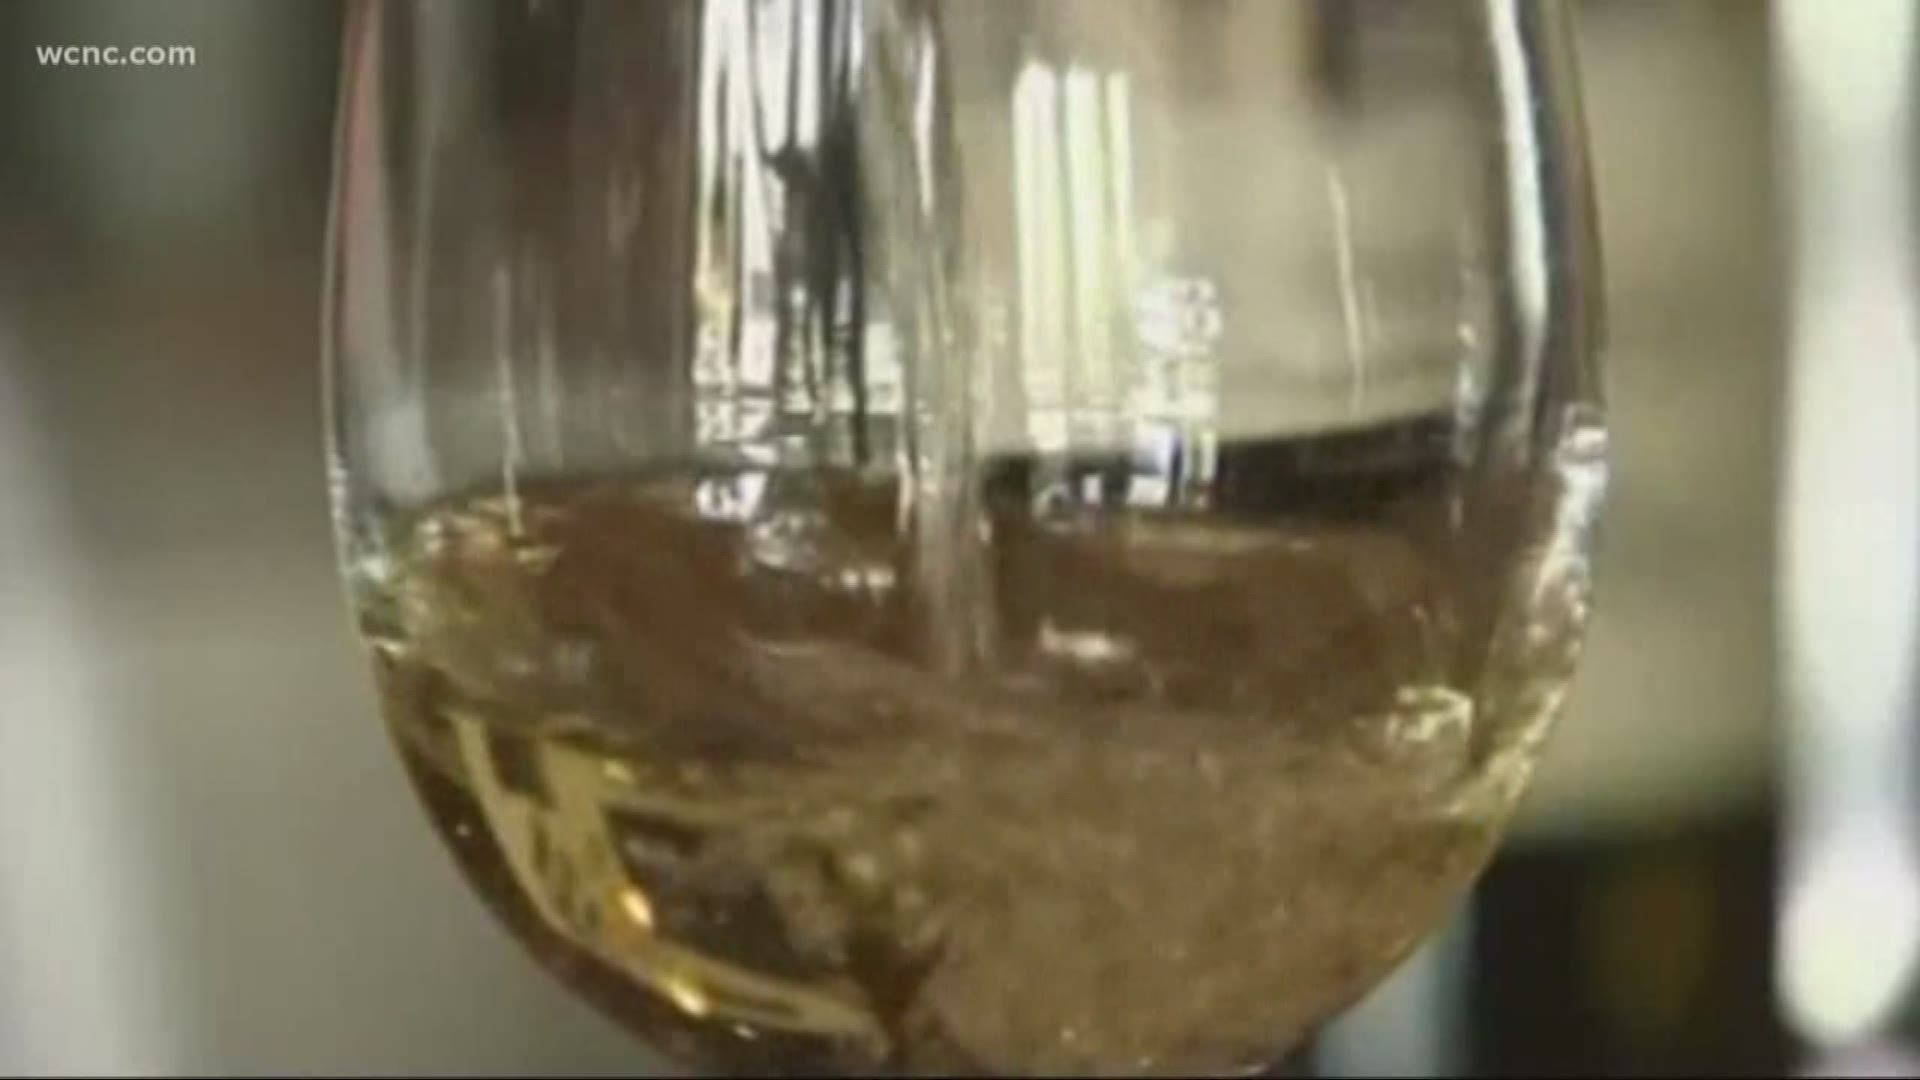 There are many schools of thought on the cost of wine, so NBC Charlotte's Bill McGinty did a wine tasting with some moderately pricey bottles and some under $10 bottles.